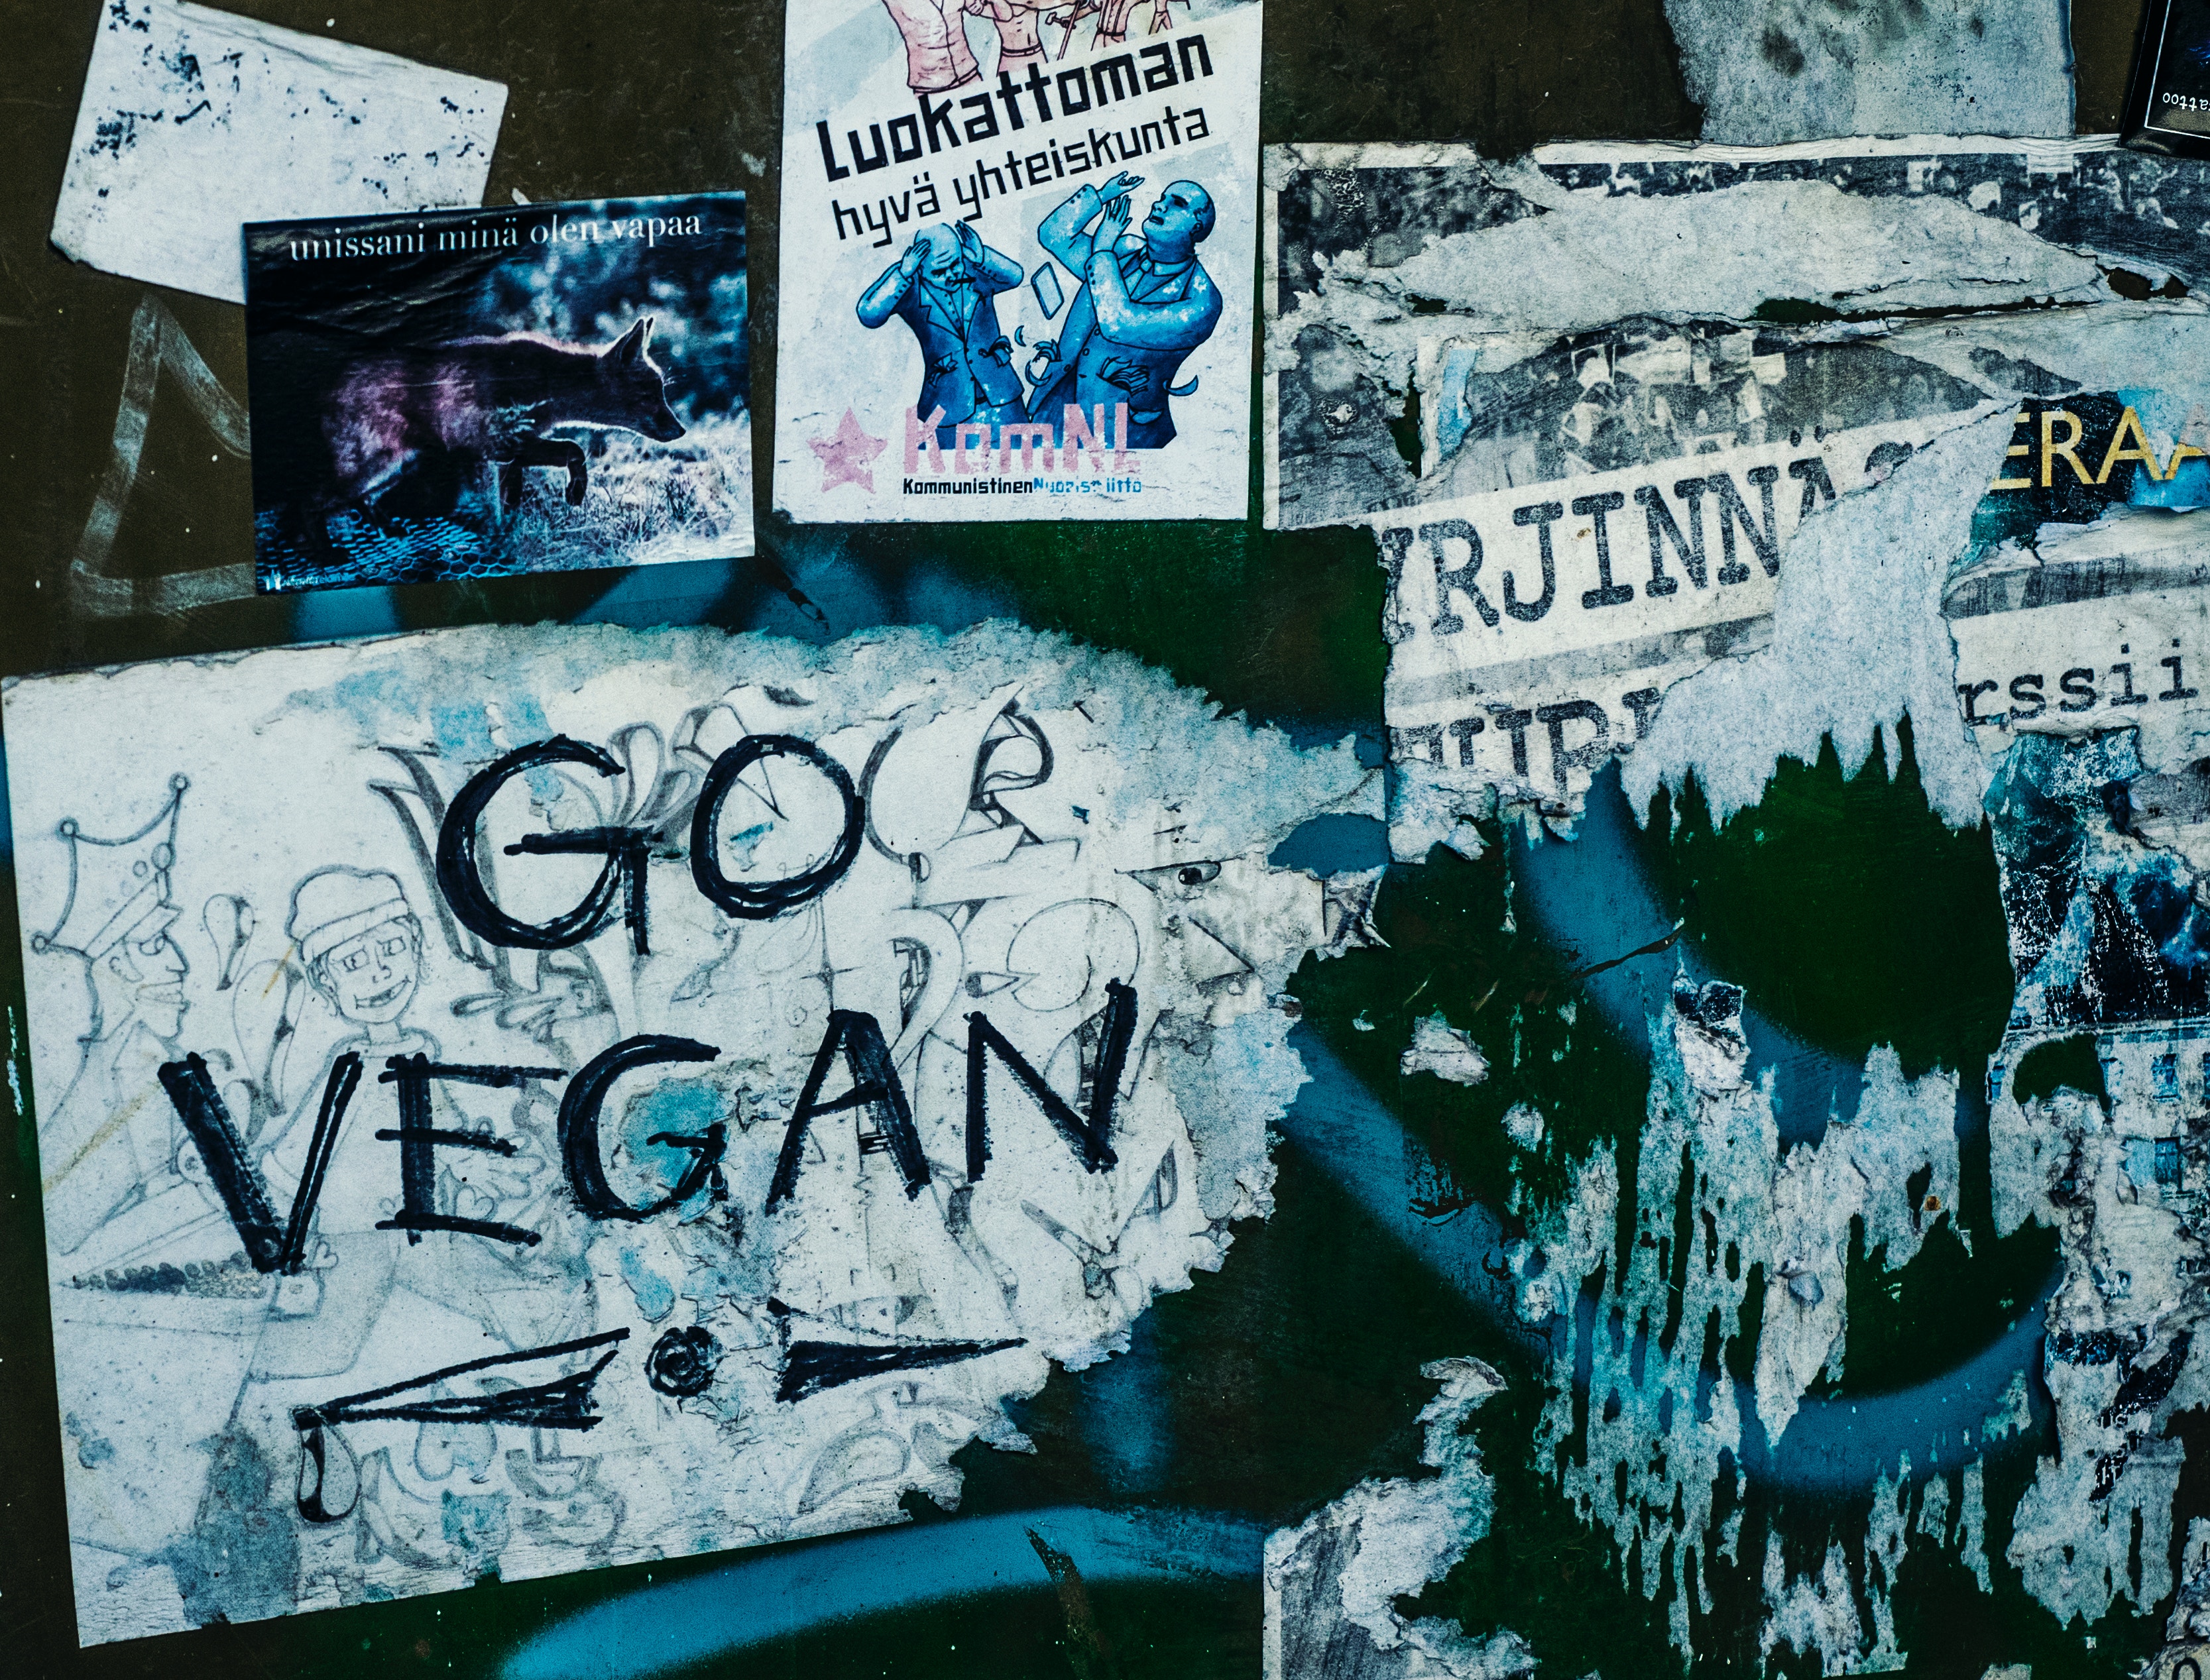 FAQ – How can I help spread the vegan message?